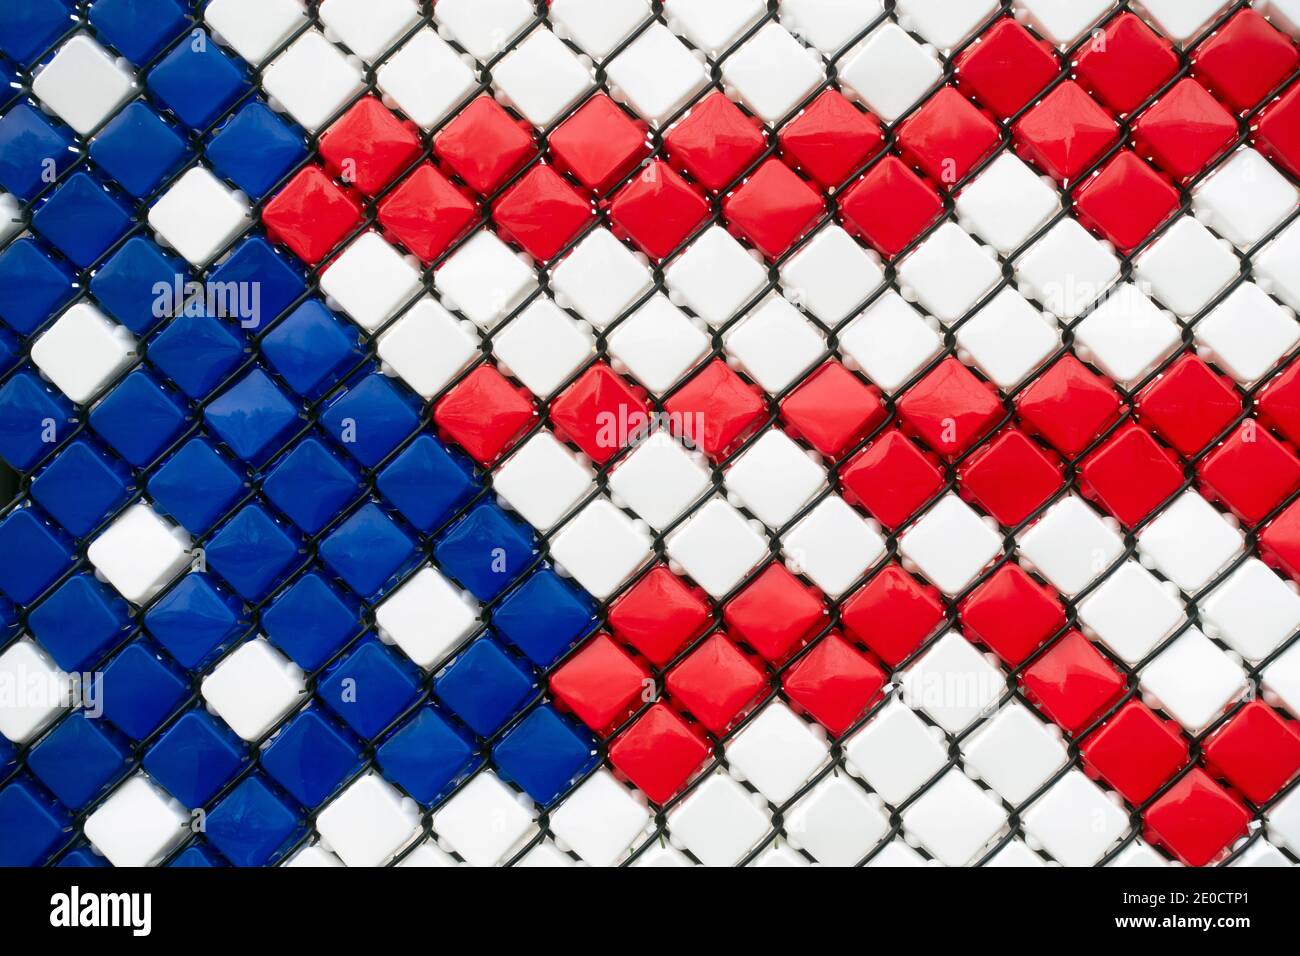 A portion of a folk art rendering of the American flag made by putting plastic squares into a chain link fence. At Holy Cross HS in Flushing, Queens, . Stock Photo